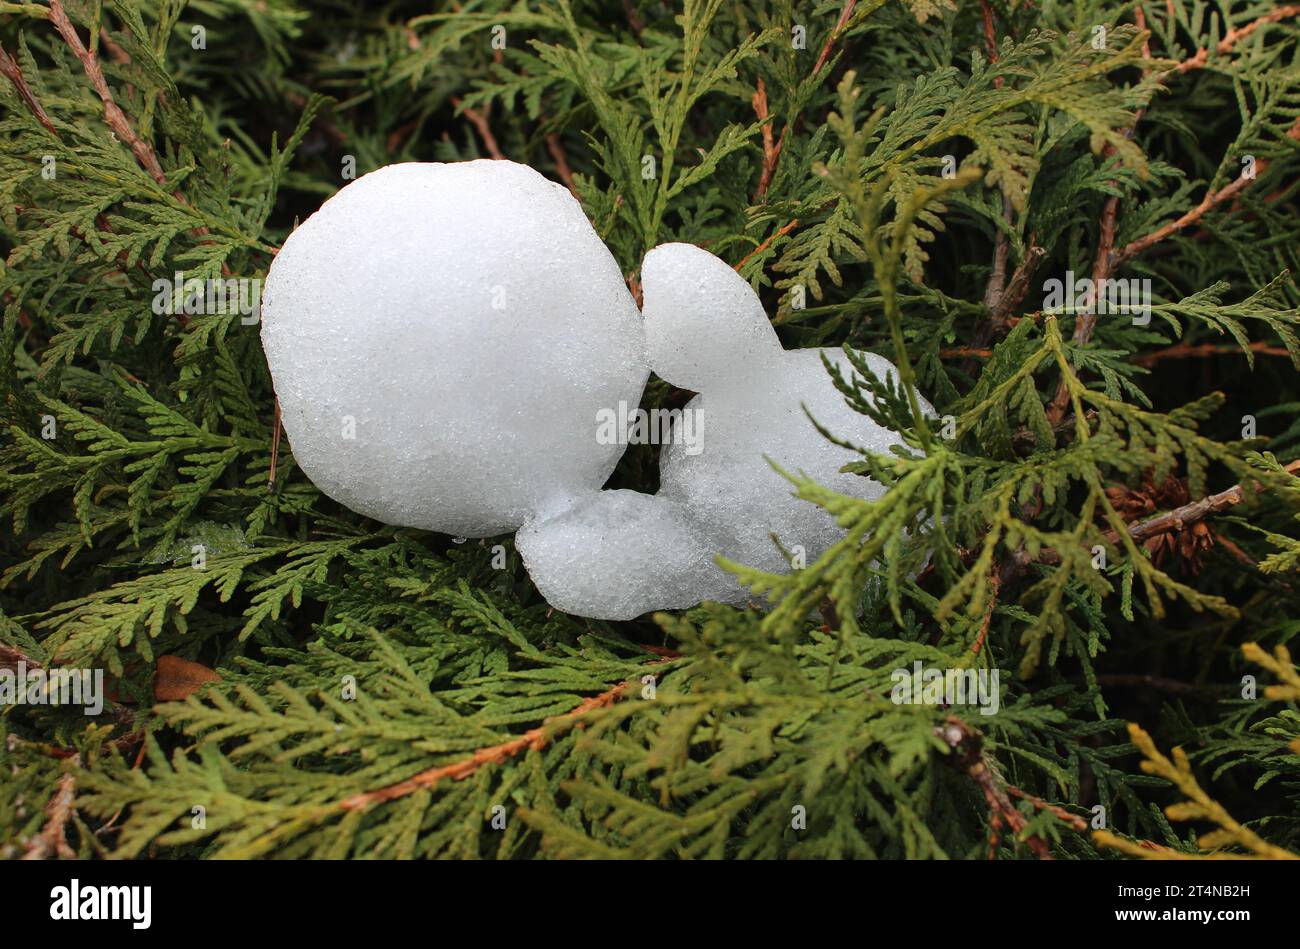 Snowball In Shape Of Little Child Figure On A Thuja Bush Branches Close Up Stock Photo Stock Photo